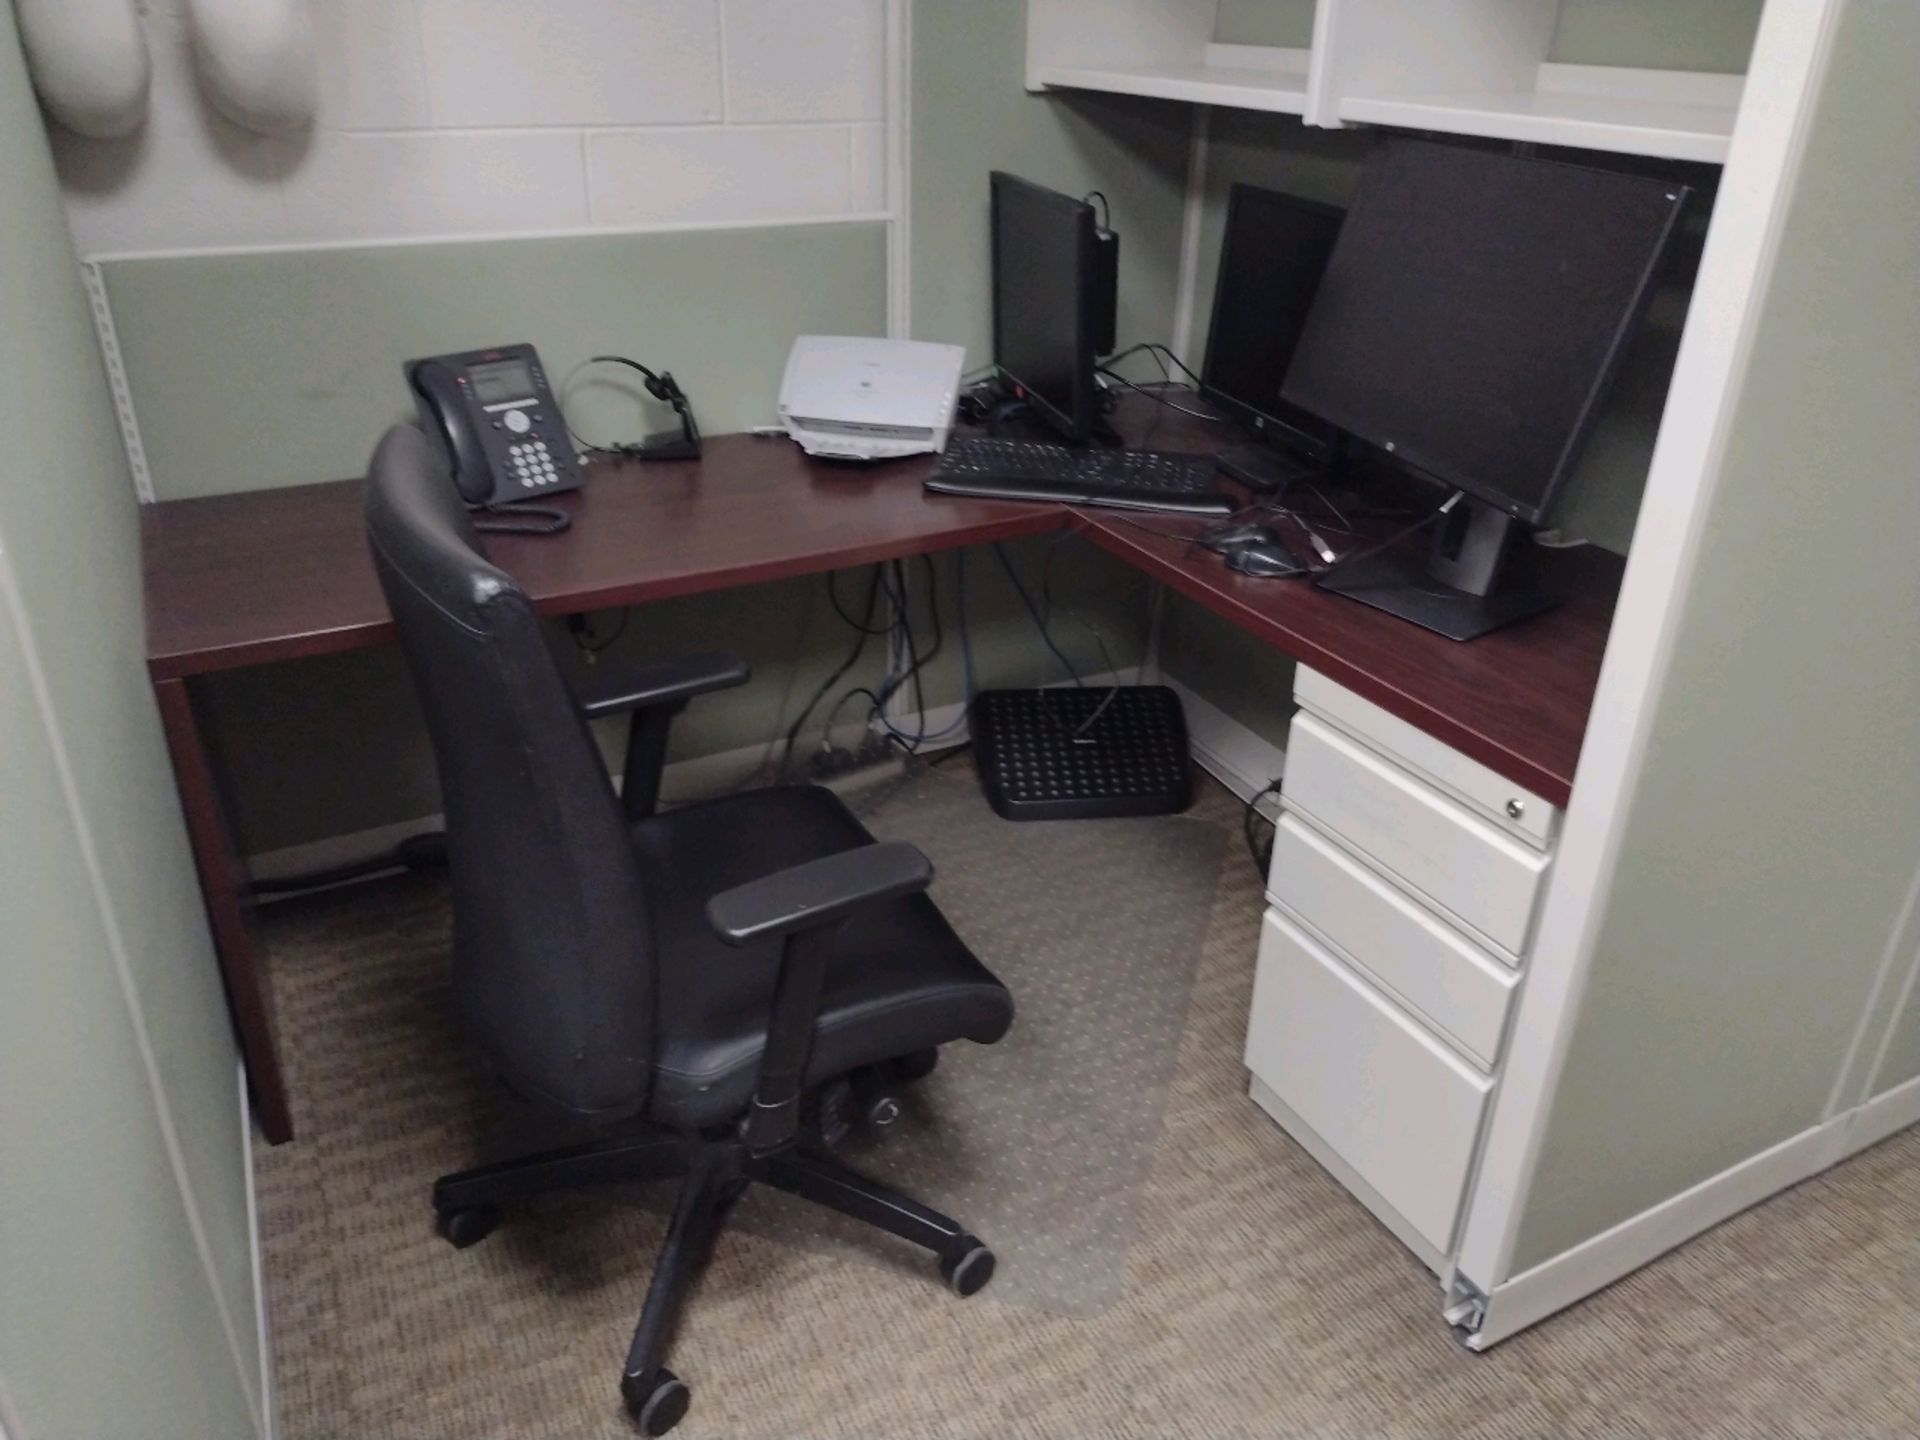 OFFICE SUITE TO INCLUDE: 8 WORK STATION MODULAR CUBICLE SYSTEM WITH CHAIRS, PRINTERS, MONITORS, - Image 11 of 16